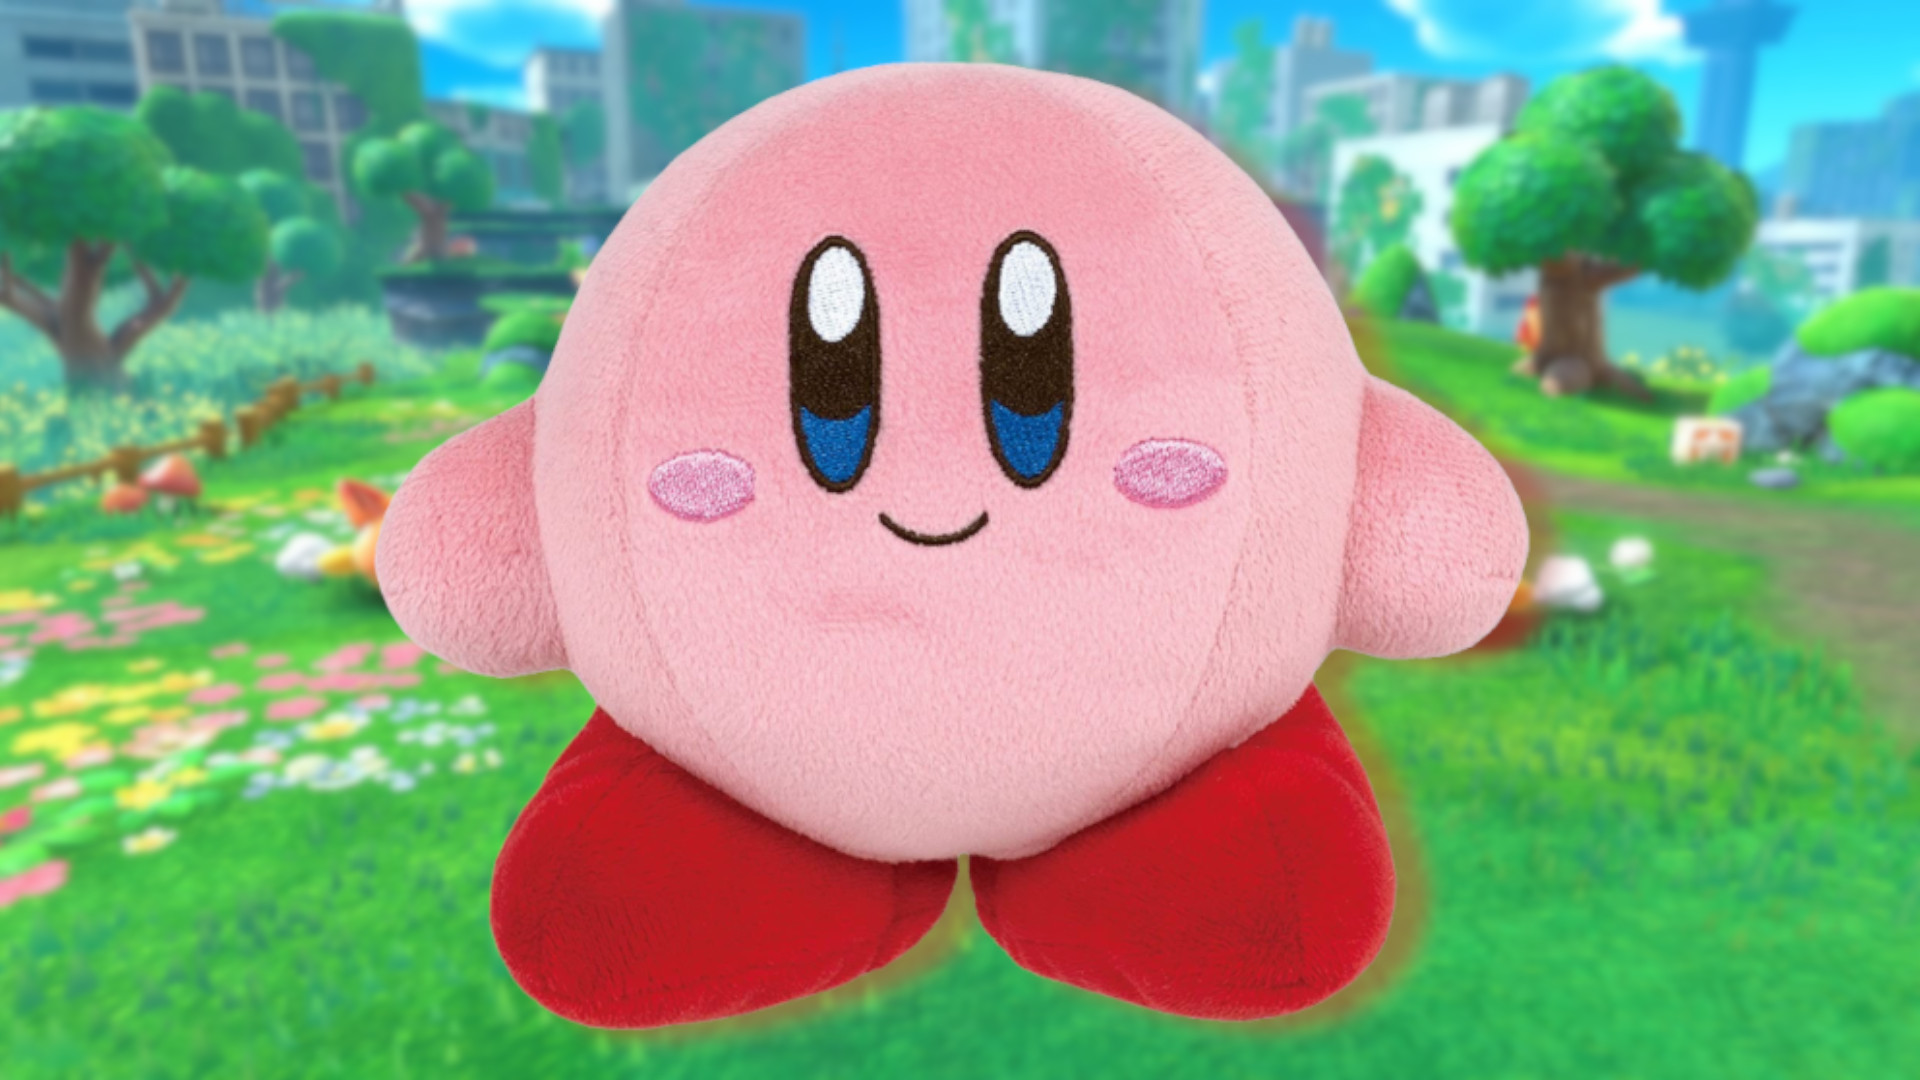  Sanei Kirby Adventure All Star Collection - KP01-5.5 Kirby  Stuffed Plush : Toys & Games